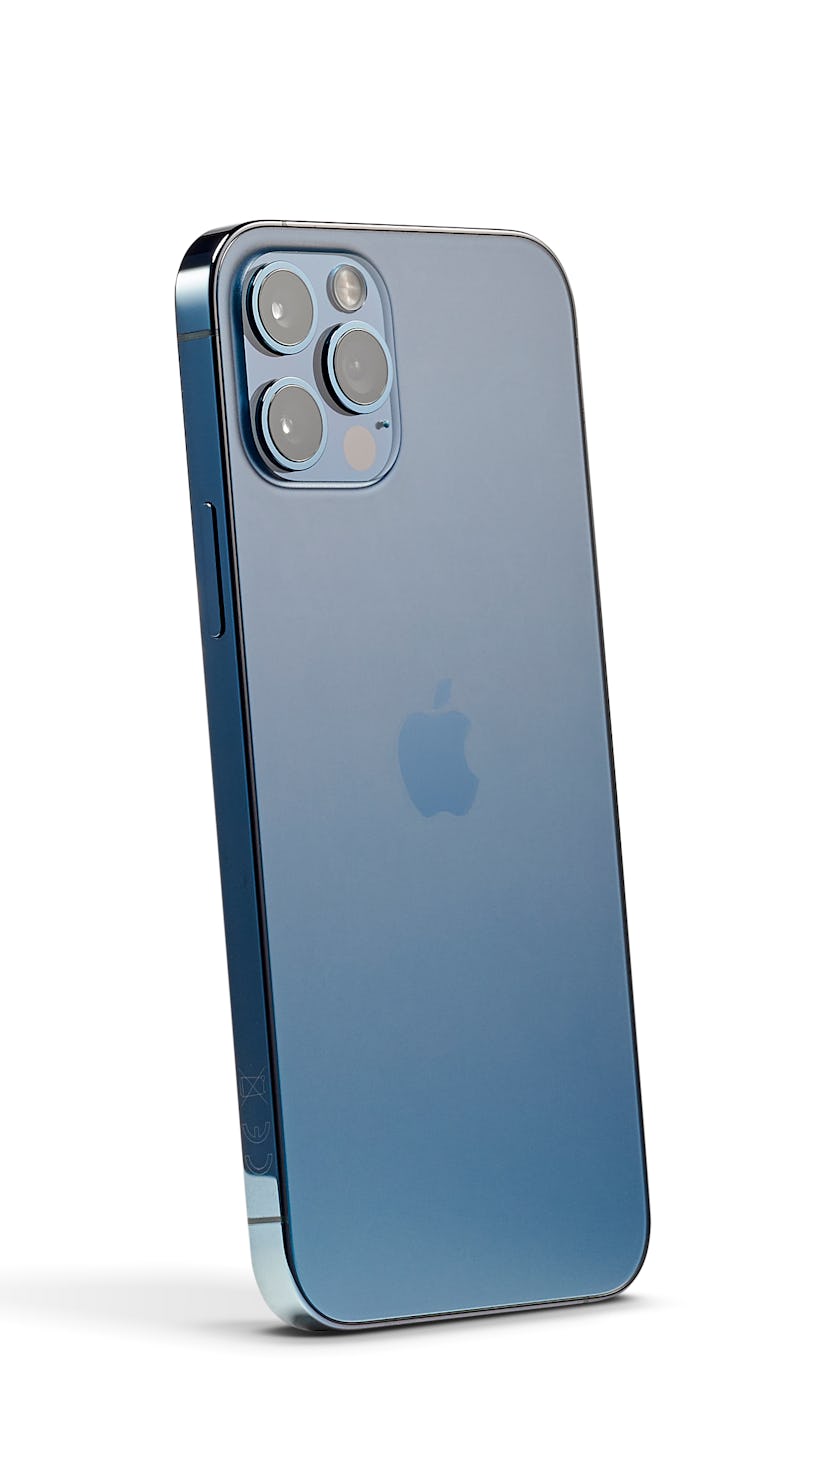 An Apple iPhone 12 Pro with a Pacific Blue finish, taken on October 28, 2020.(Photo by Phil Barker/F...